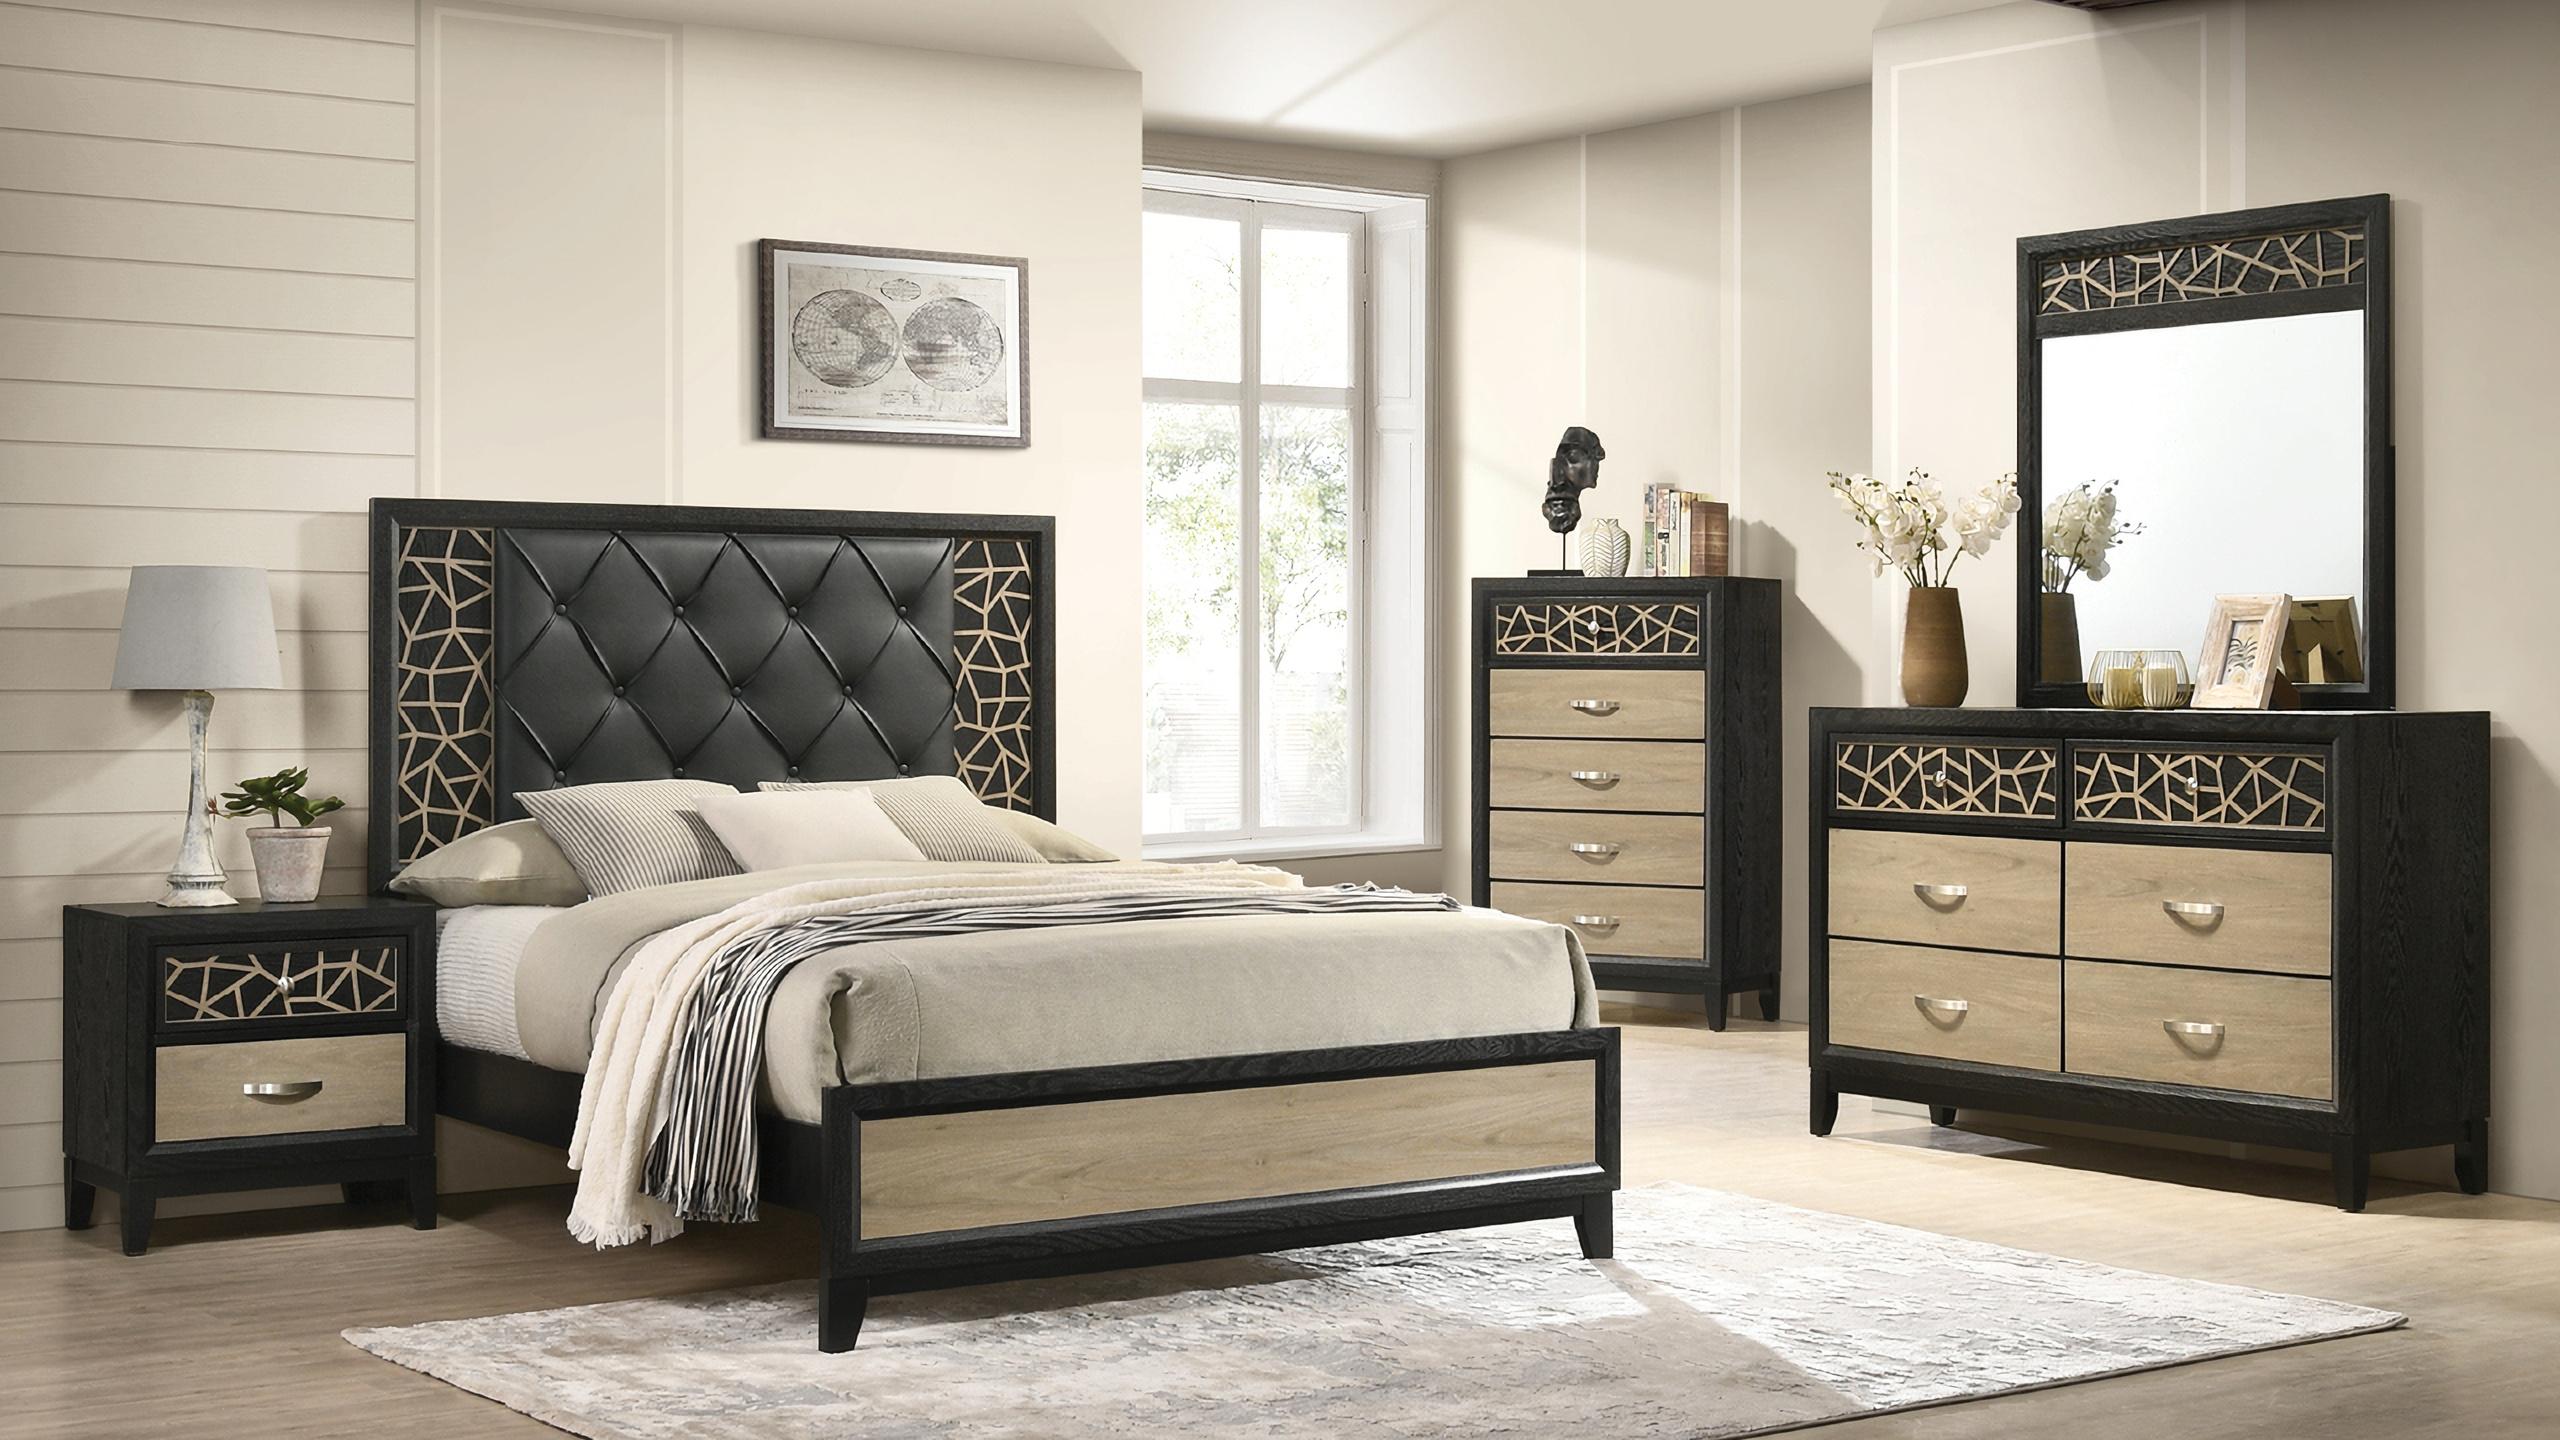 

    
Upholstered Queen Bed Set 4Pcs with Wooden Pattern In Black Selena Galaxy Home Contemporary
